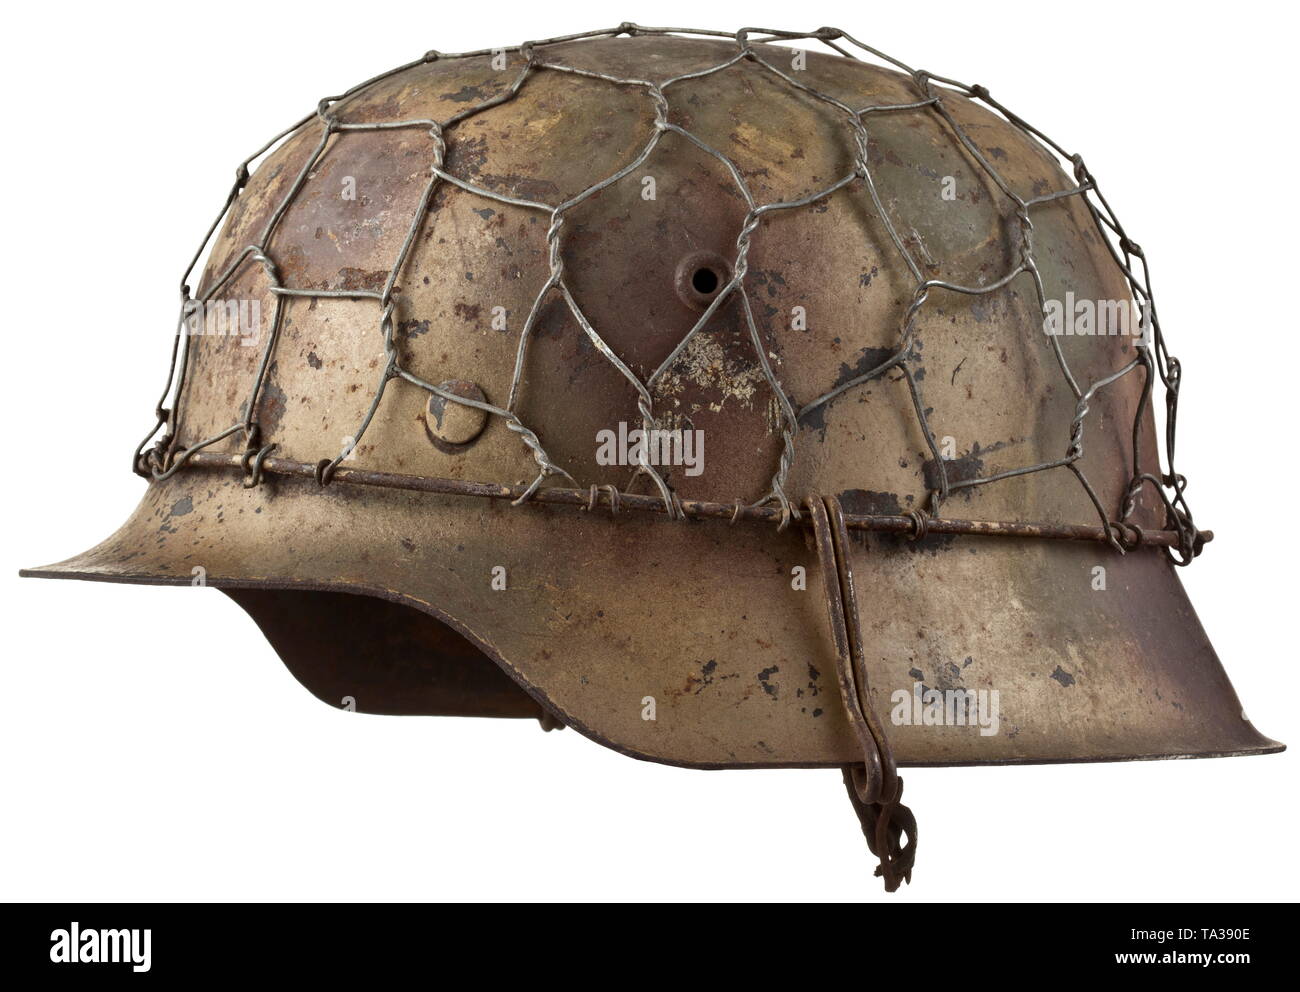 A steel helmet M 42 with multi-colour camouflage paint and chicken wire Steel skull painted in green- and brown-toned camouflage (above the field-grey base layer), the inside with maker stamping 'ET64' and '1923', complete inner liner with chin strap, contemporary chicken wire netting strung over the helmet for affixing camouflage material. historic, historical, army, armies, armed forces, military, militaria, object, objects, stills, clipping, clippings, cut out, cut-out, cut-outs, 20th century, Editorial-Use-Only Stock Photo